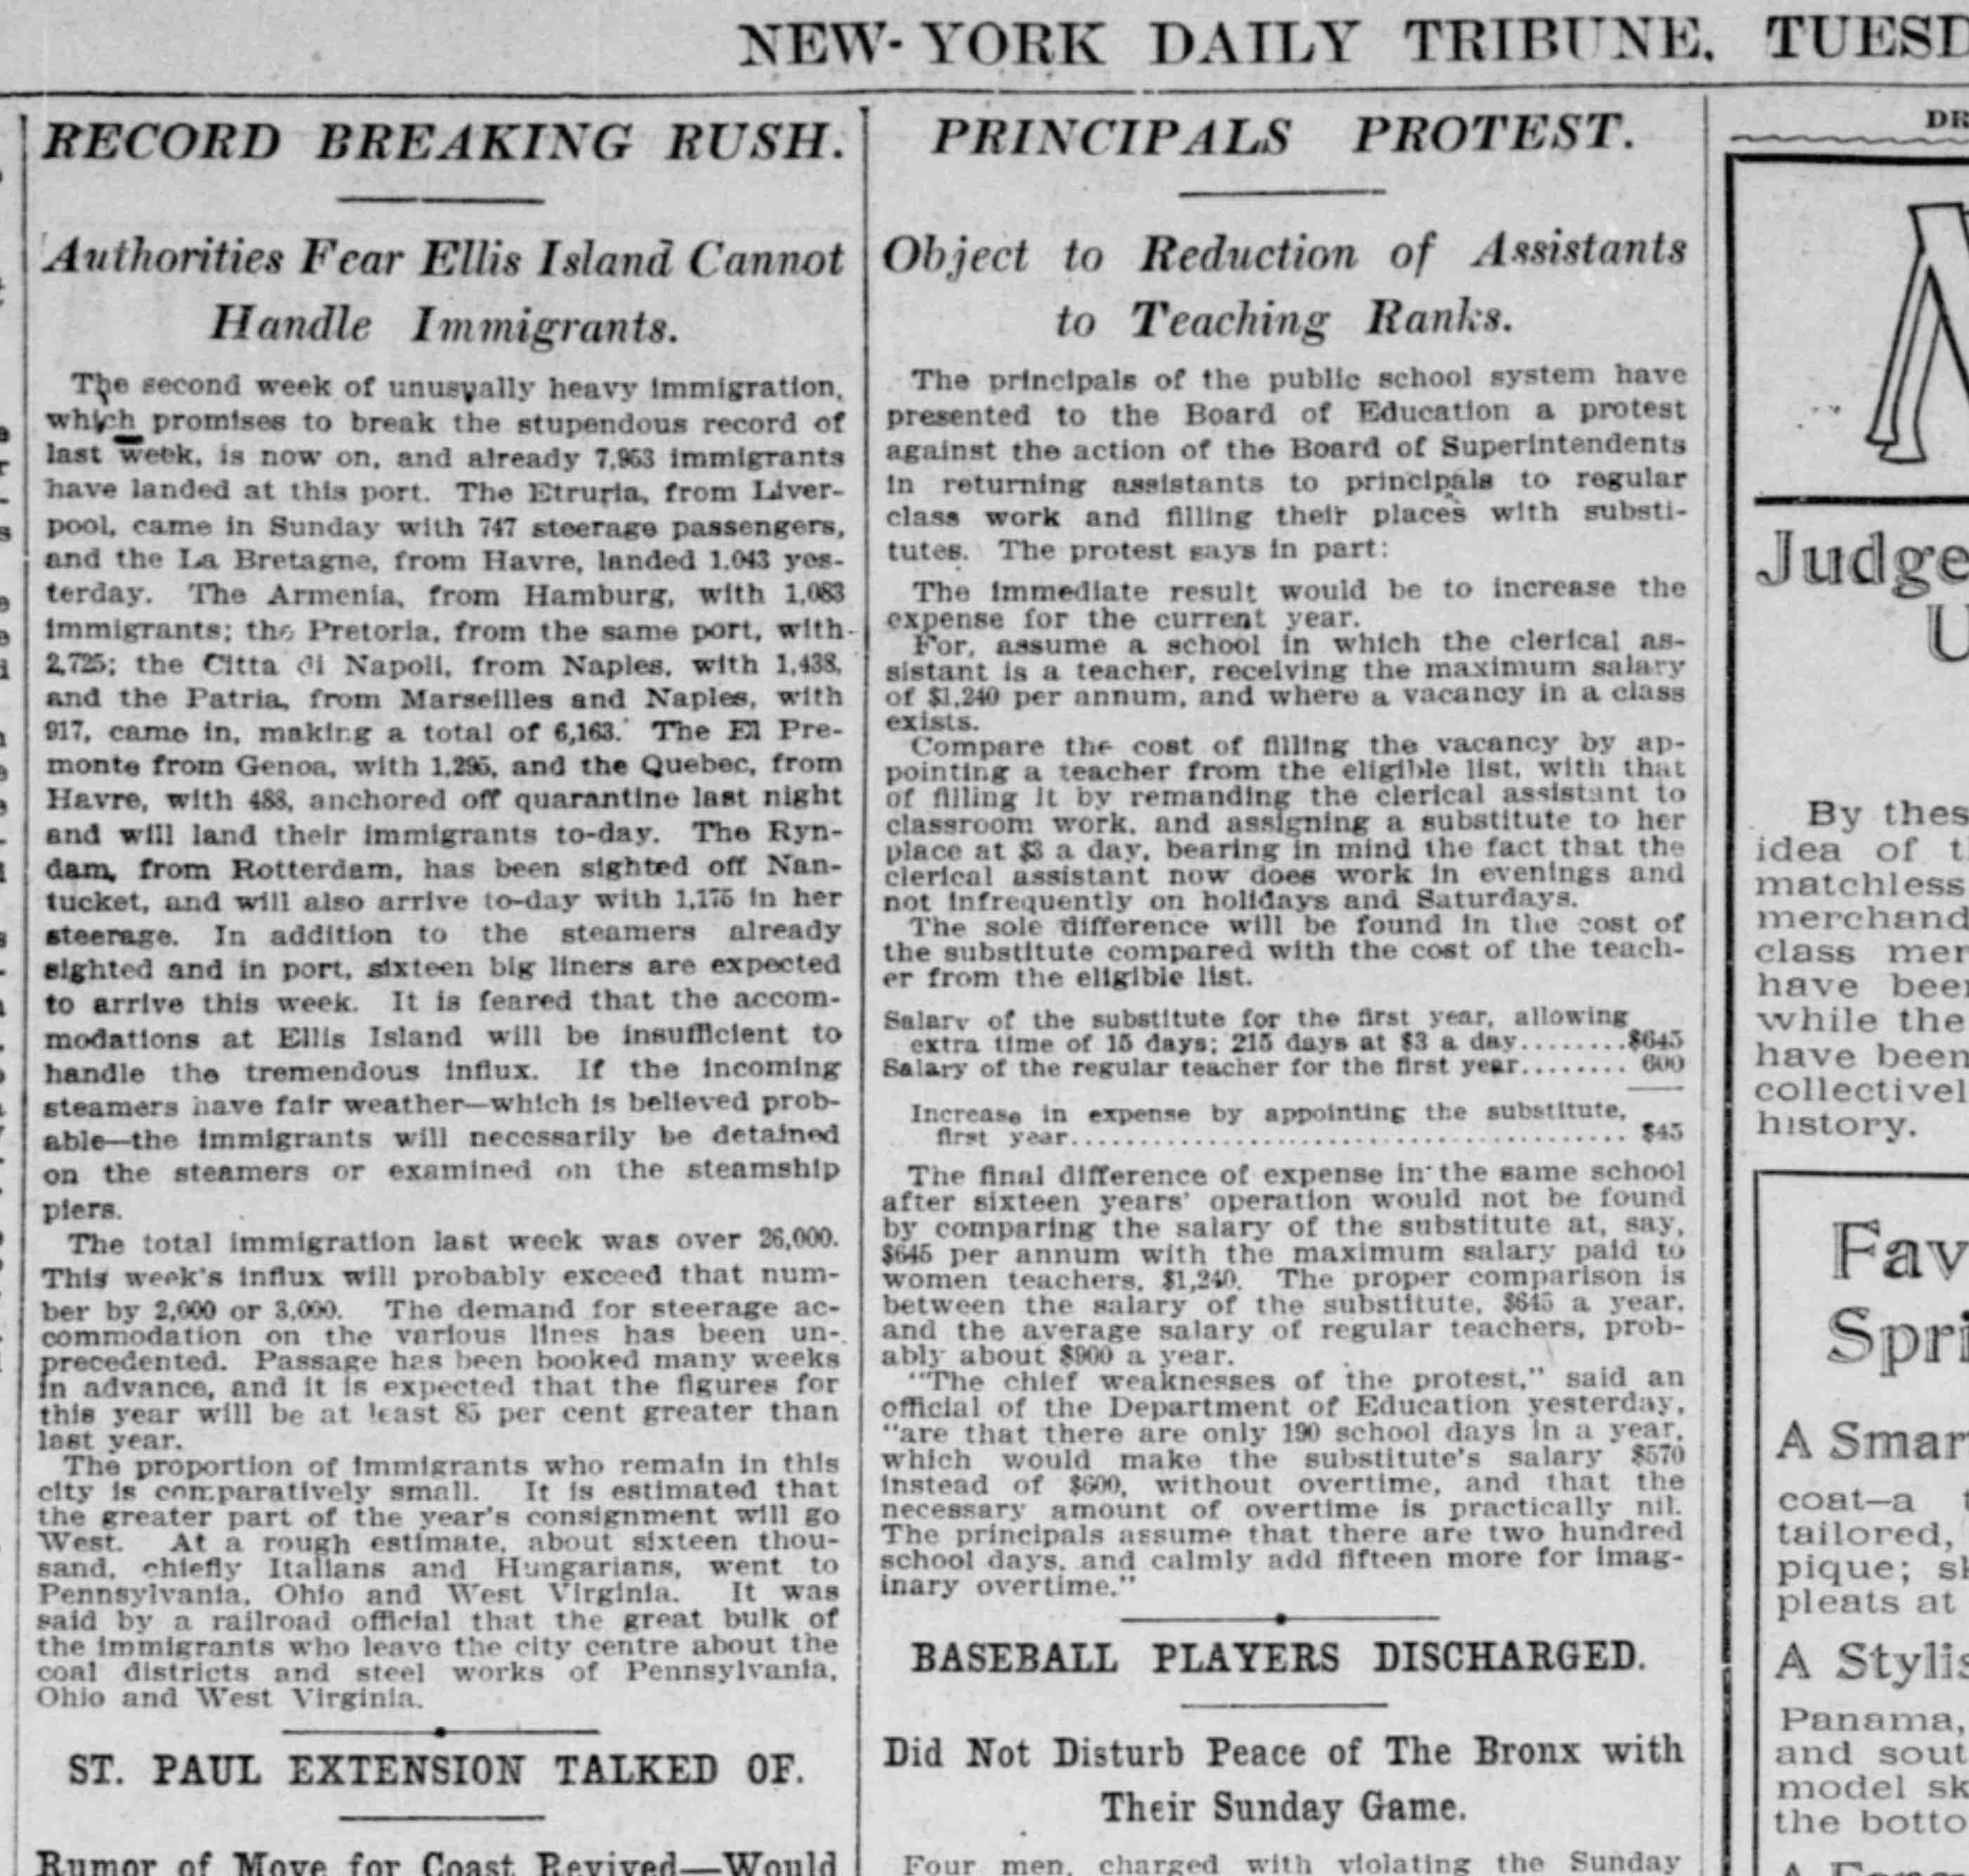 New York Daily Tribune dated March 28, 1905 reporting arrival of 26,000 previous week